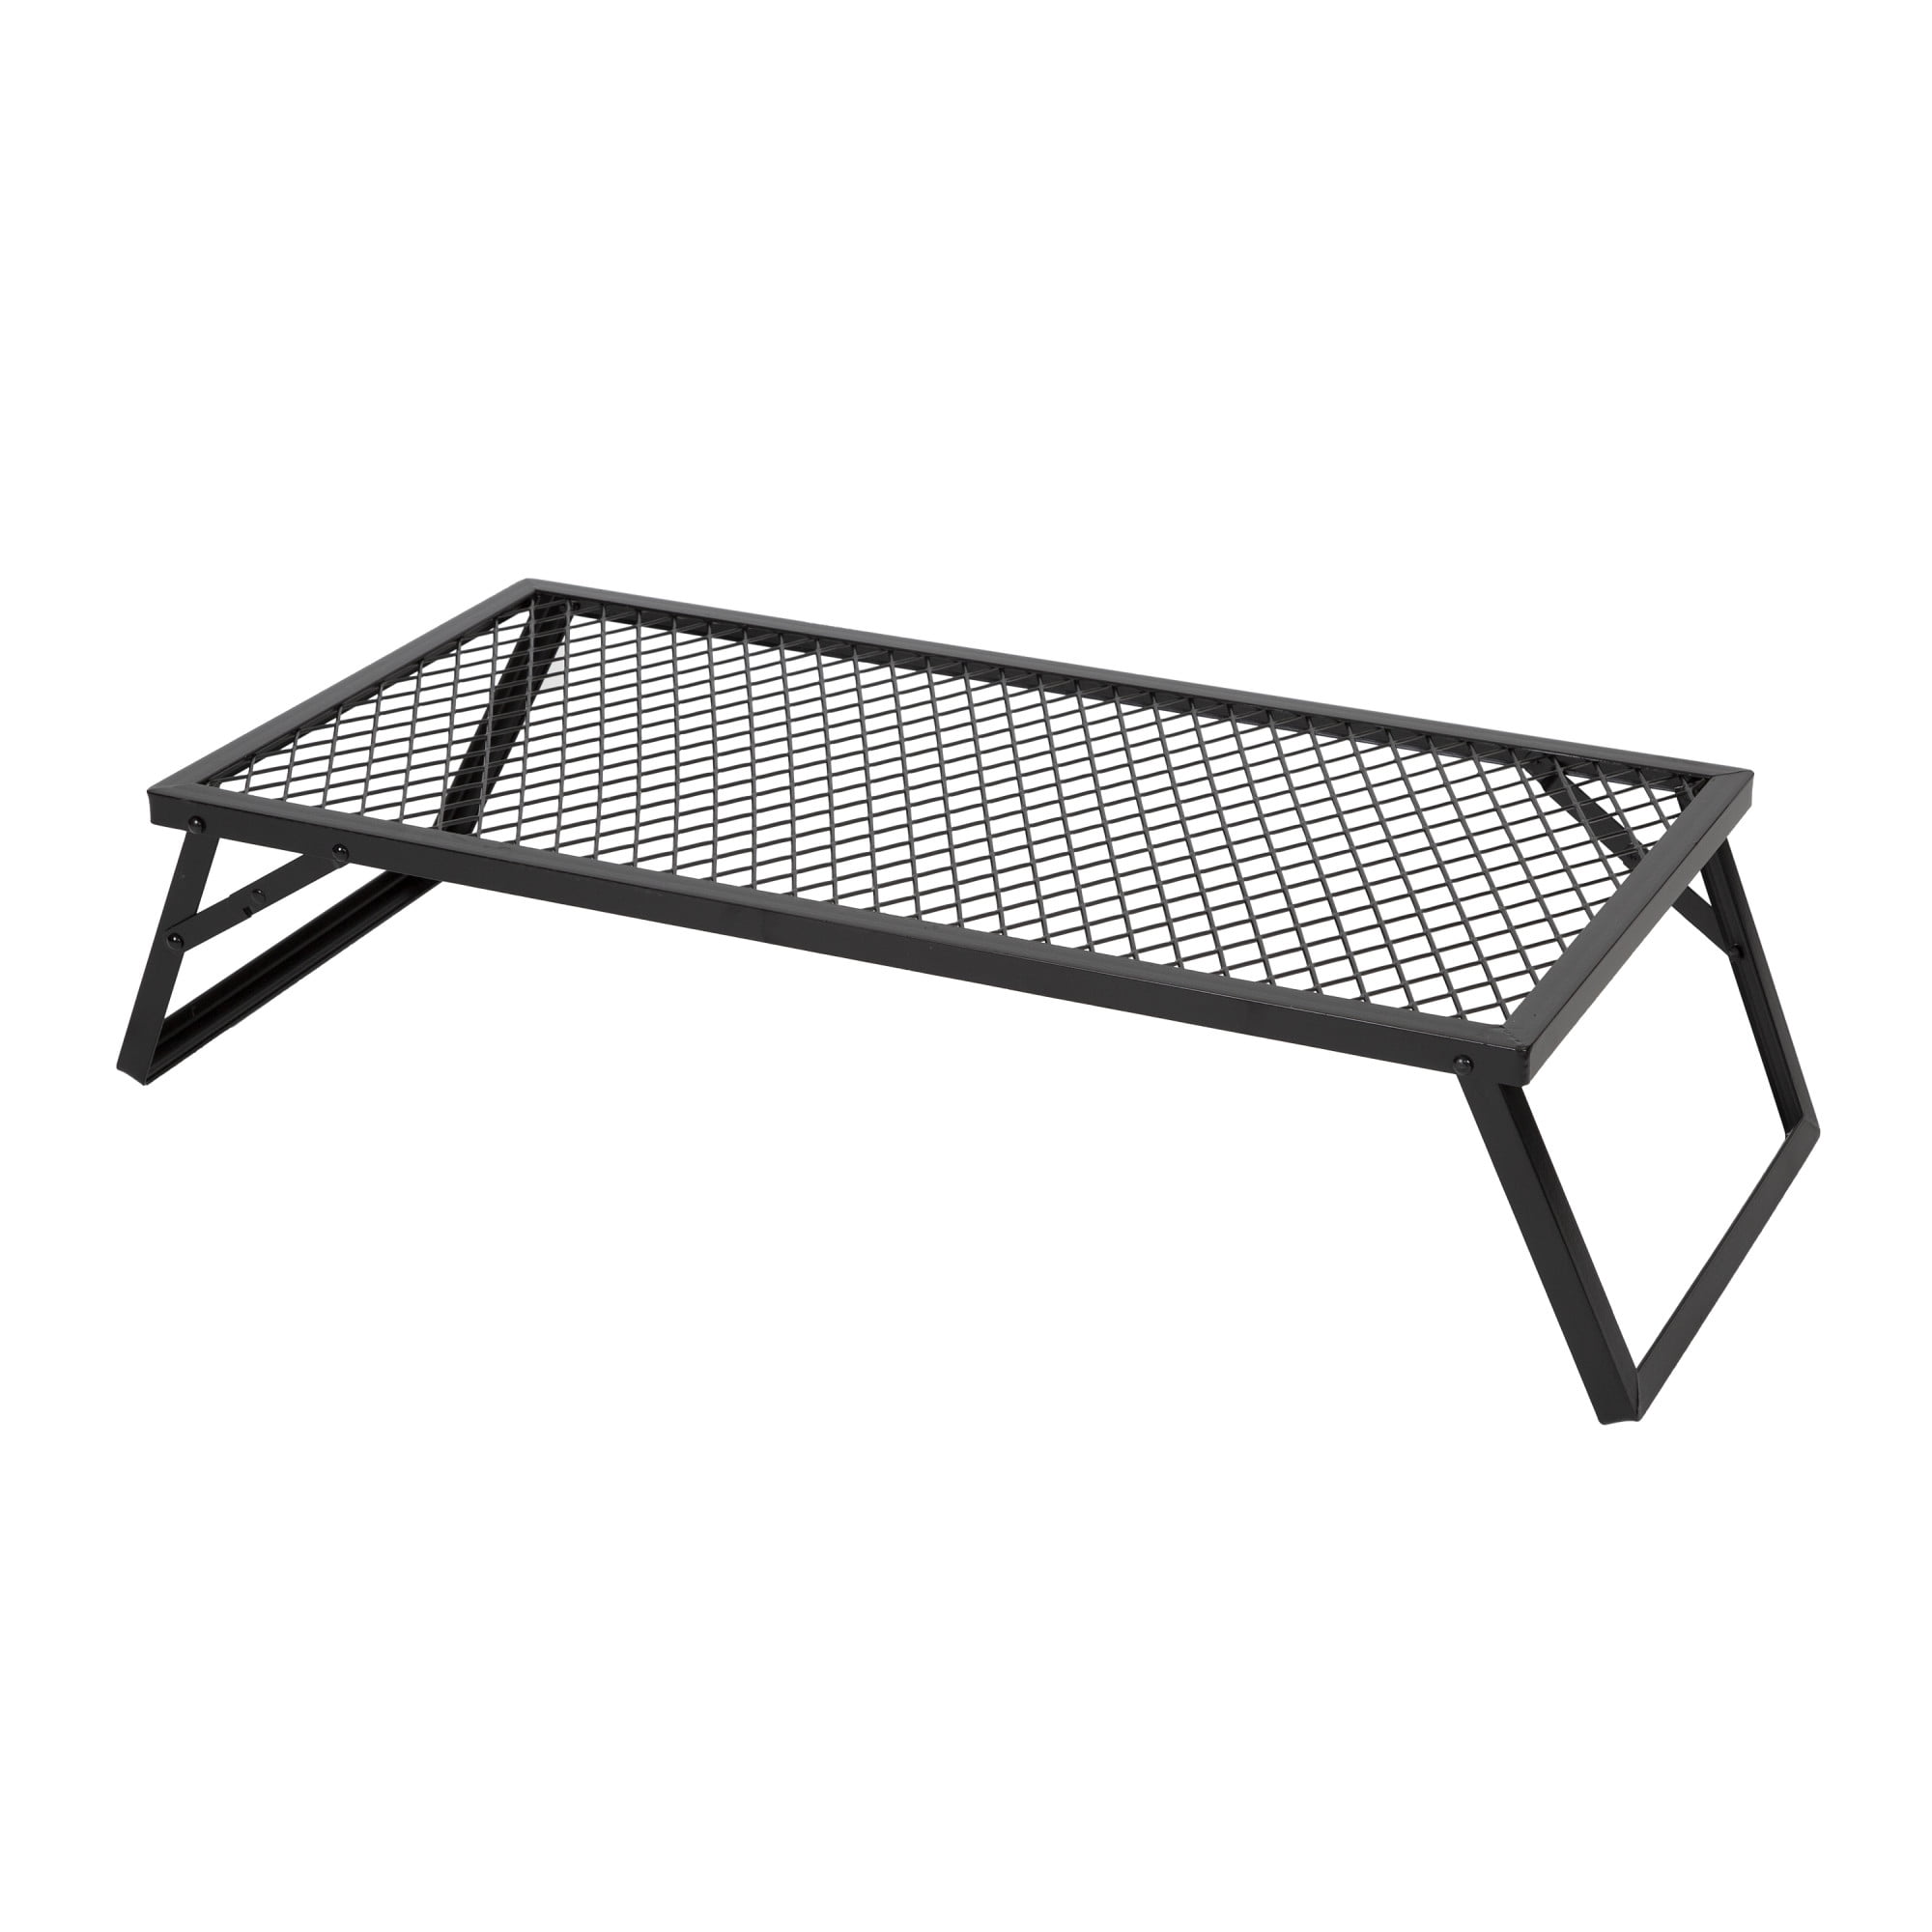 Stansport Extra Heavy Duty Steel Grill